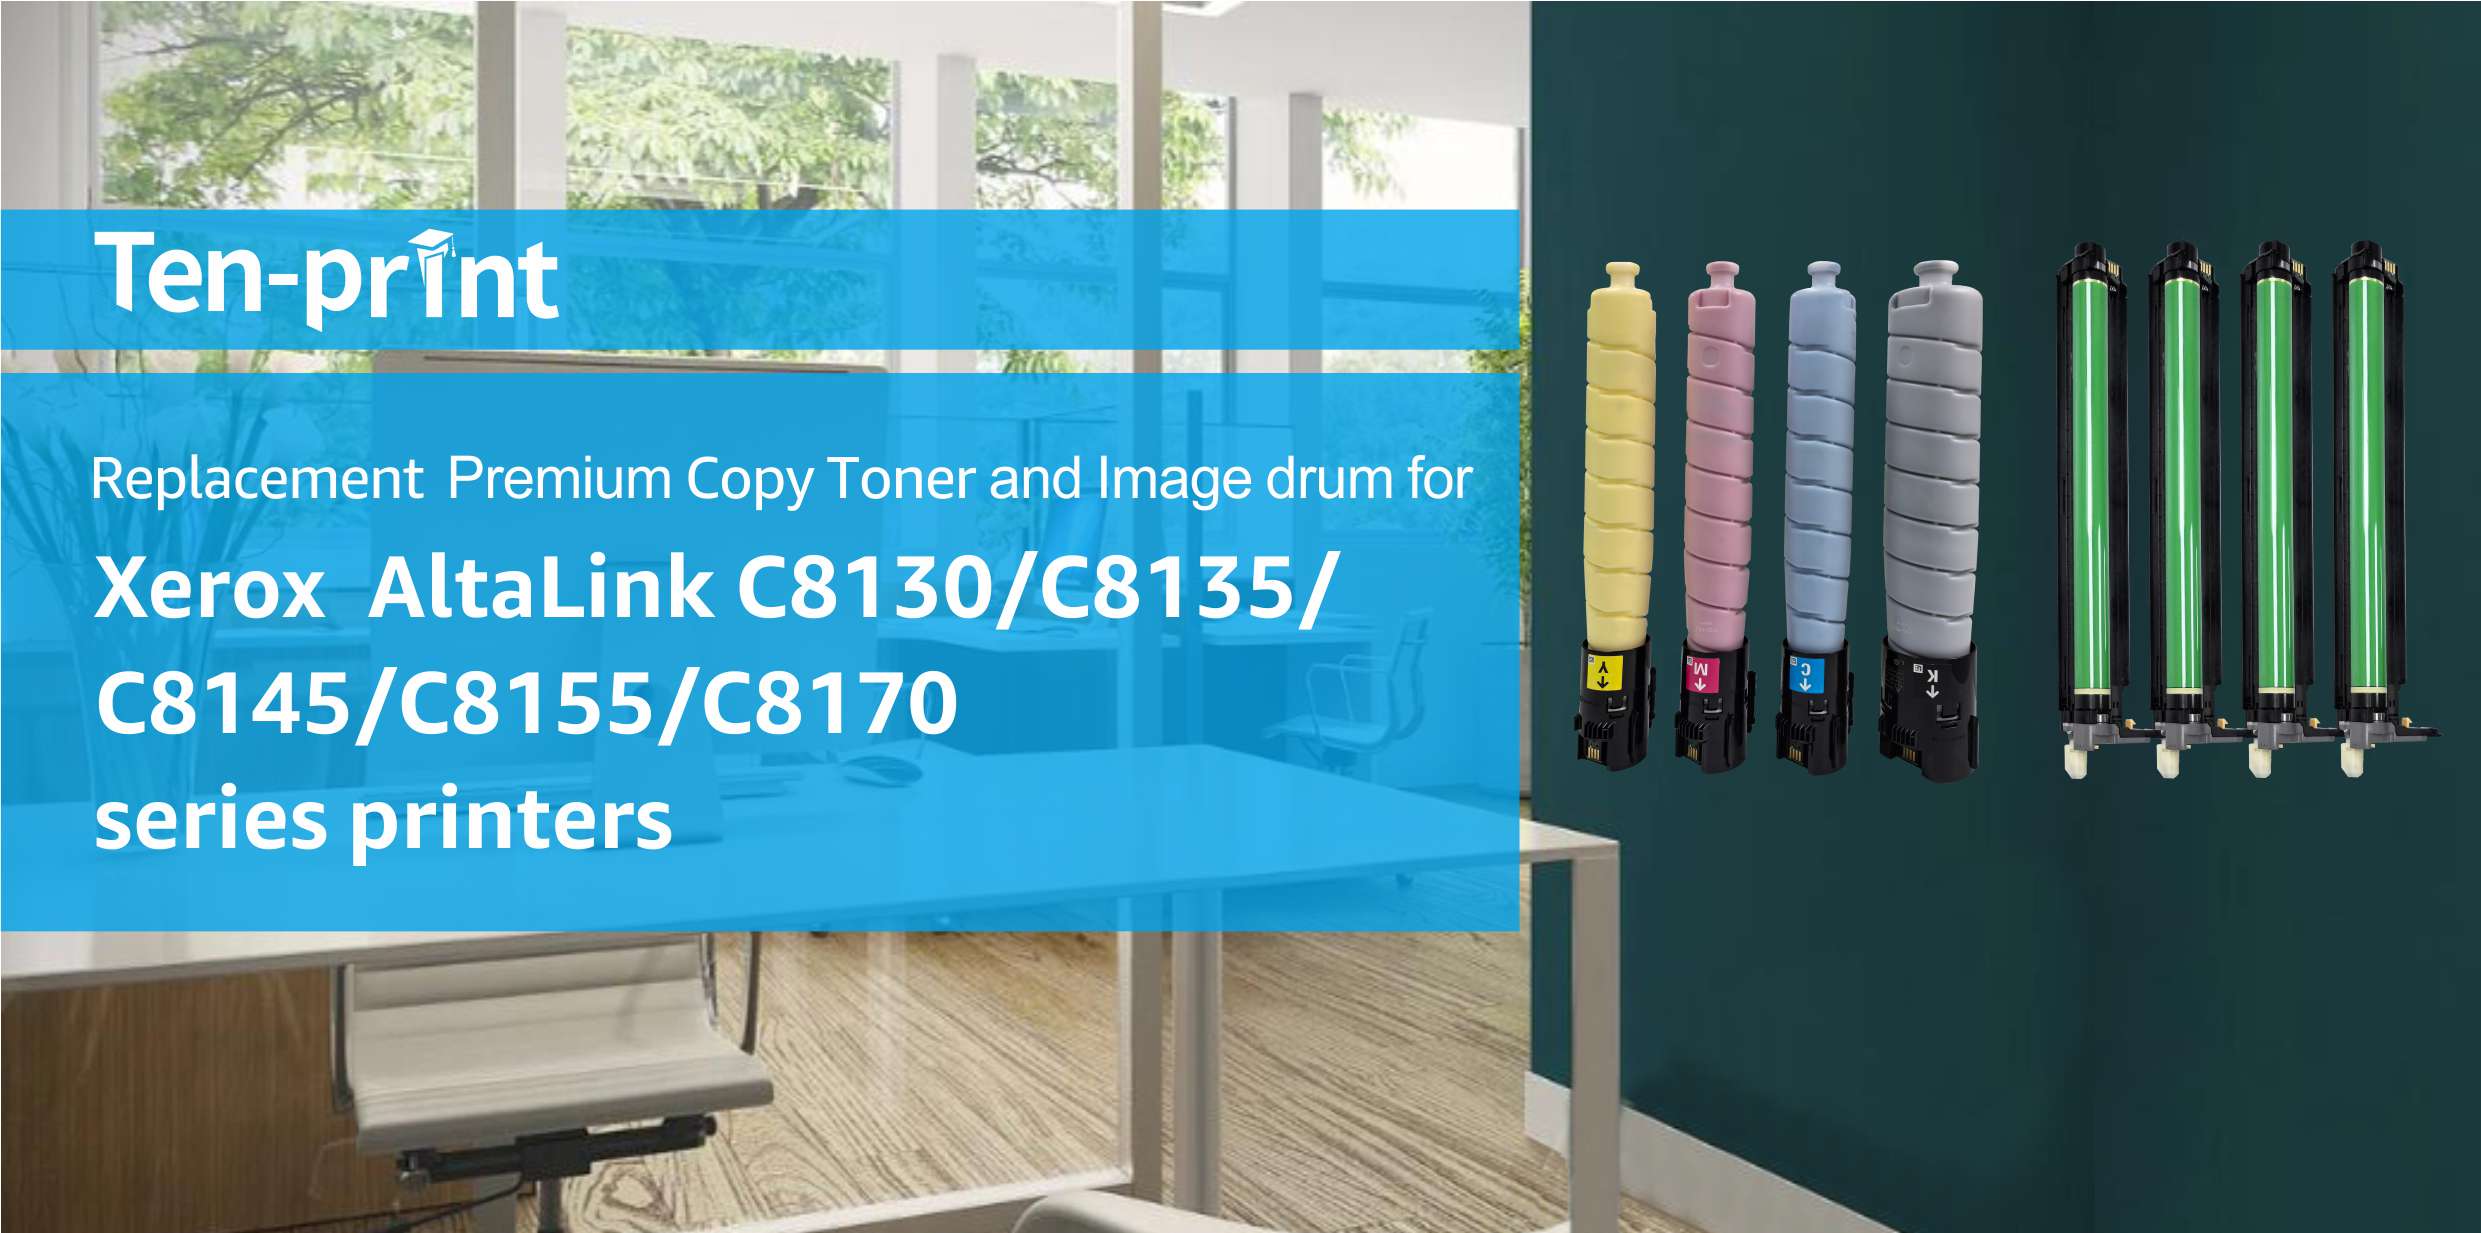 Ten-print Launches Remanufactured Products for Xerox Printers